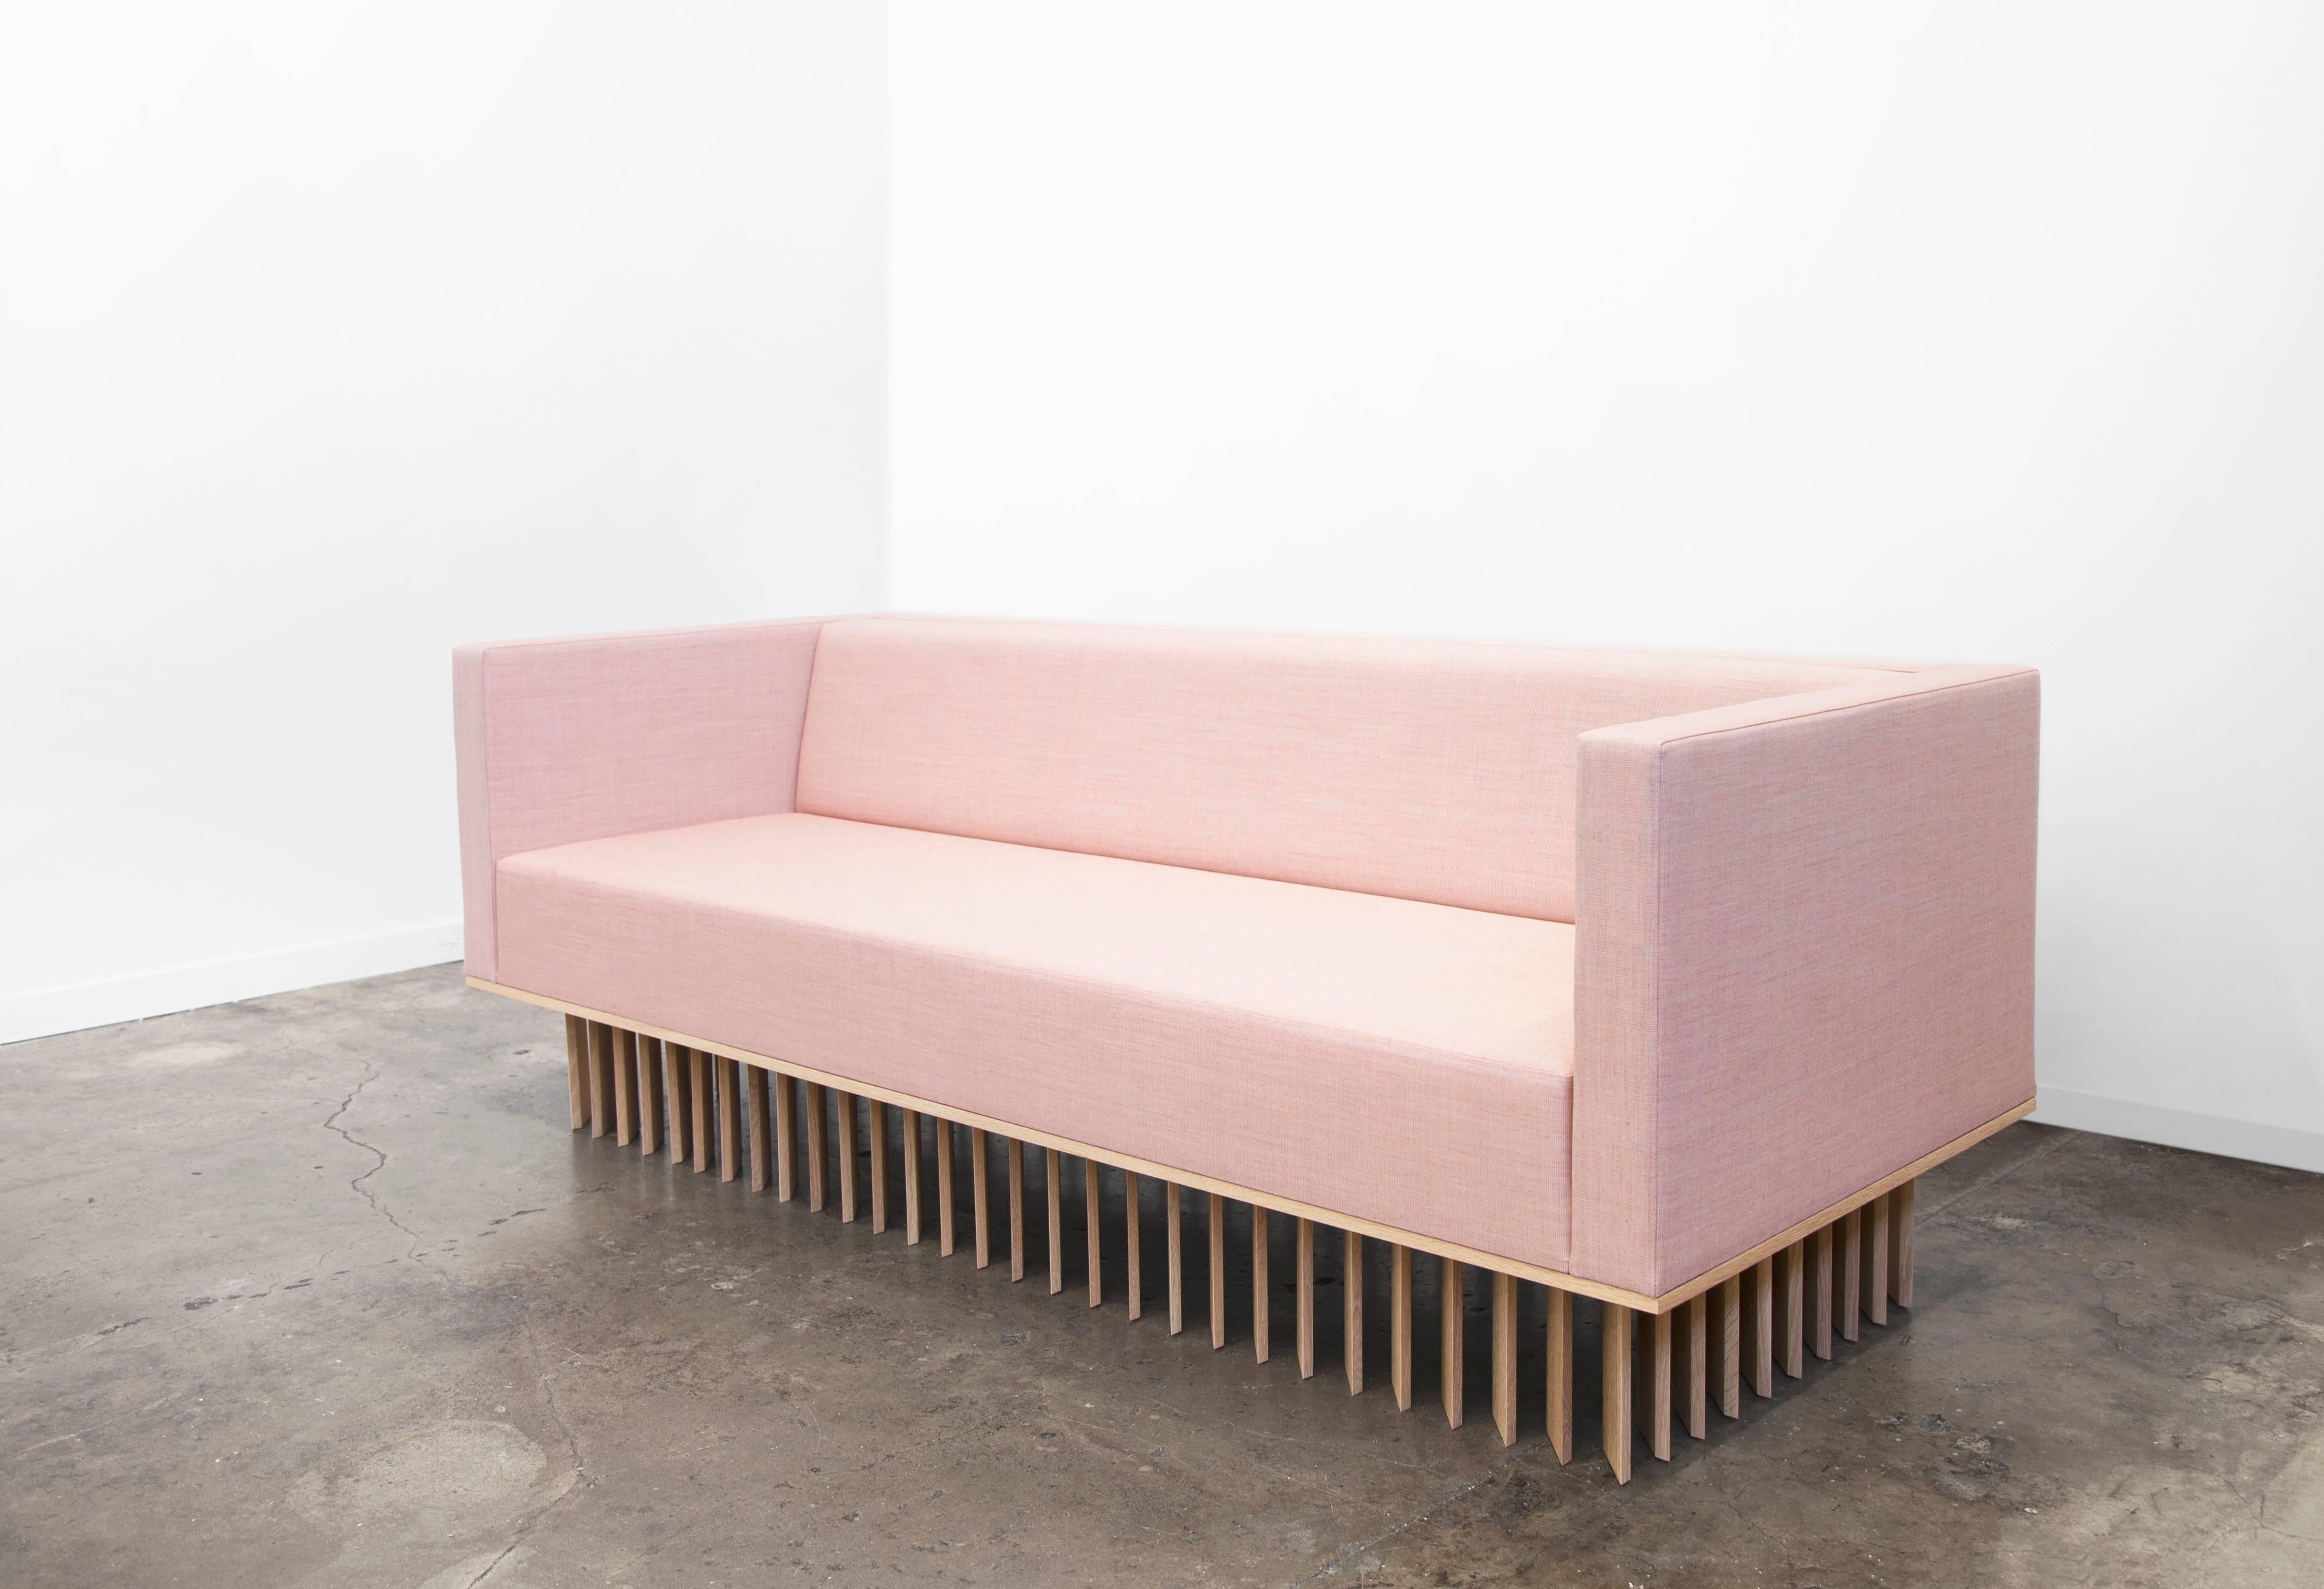 Not So General Gallery in Los Angeles is proud to present the Angled Wood Bar Sofa from design studio Early Work.  A modern masterpiece, the sofa is plushly upholstered in Manner by Maharam, the seat cushion of the sofa sits atop a white oakwood